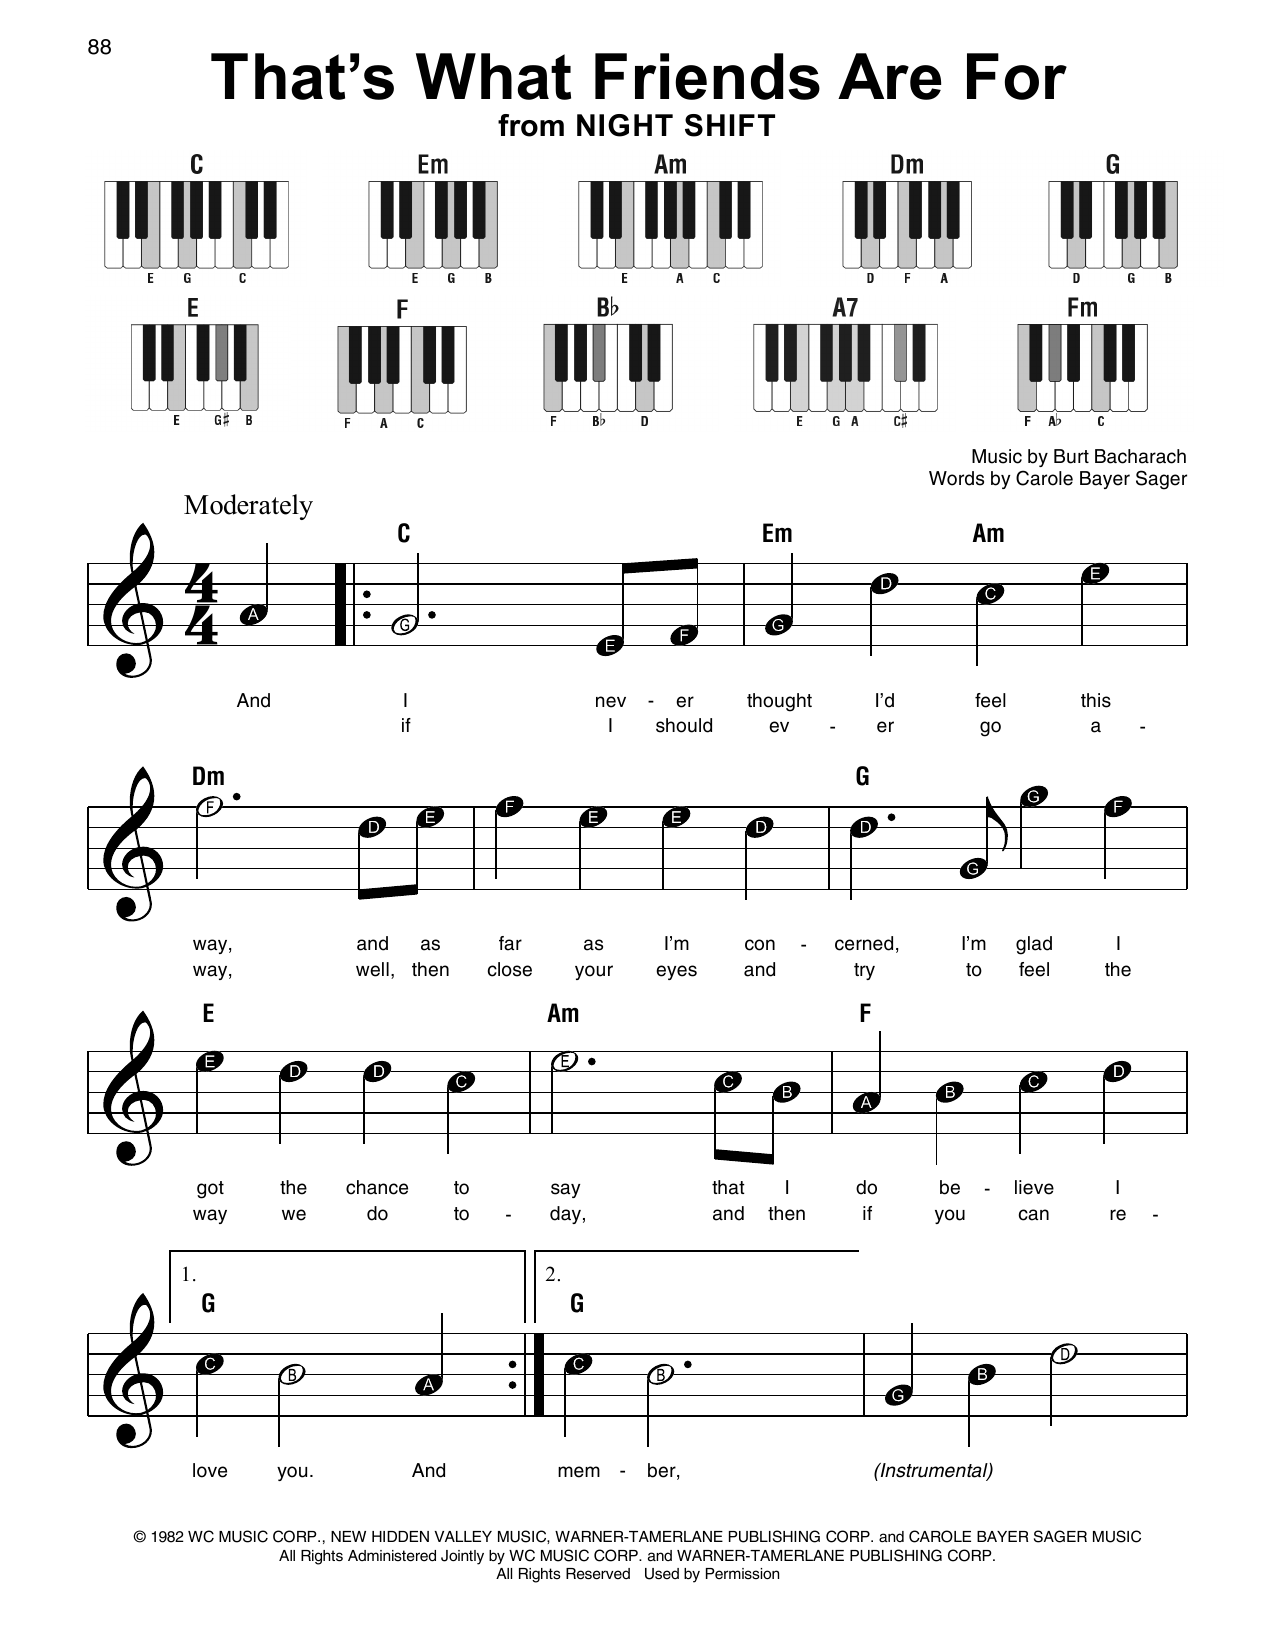 Download Dionne & Friends That's What Friends Are For Sheet Music